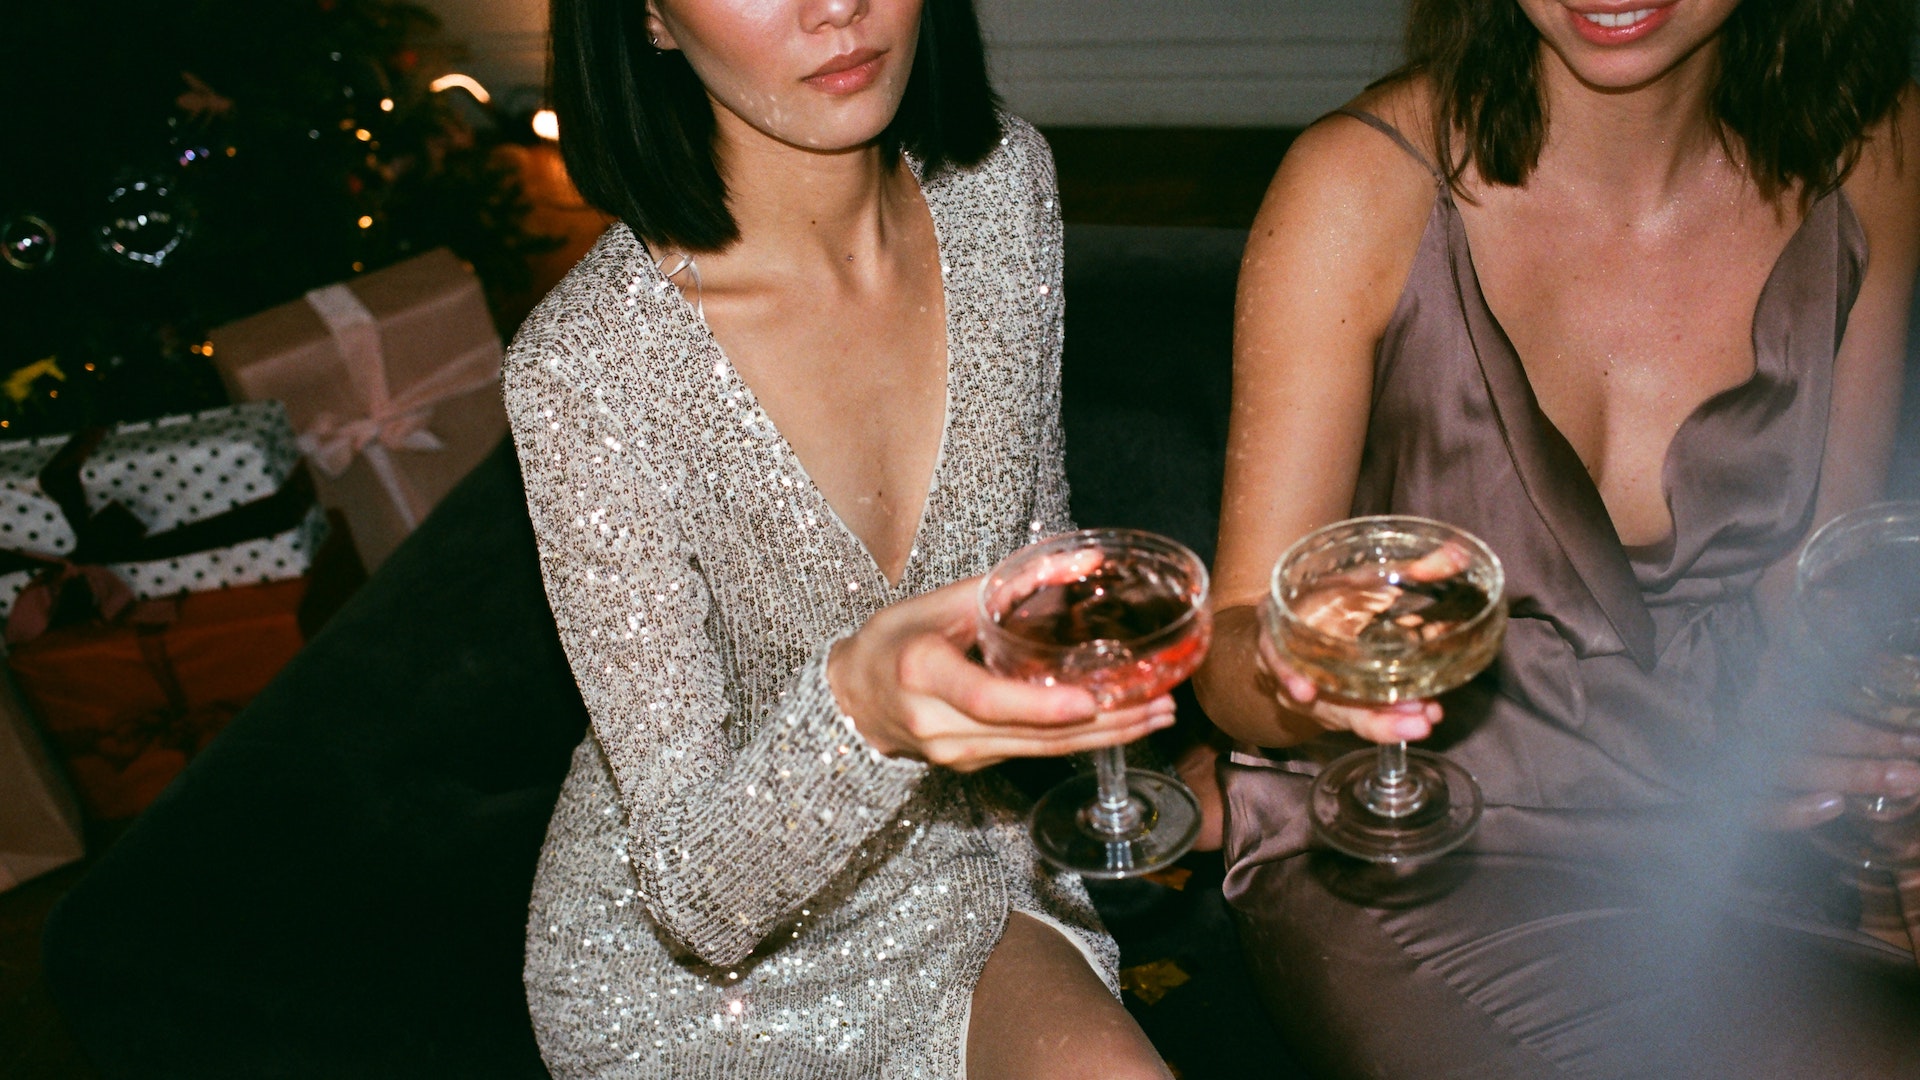 Two women hold wine glasses wearing glamourous dresses